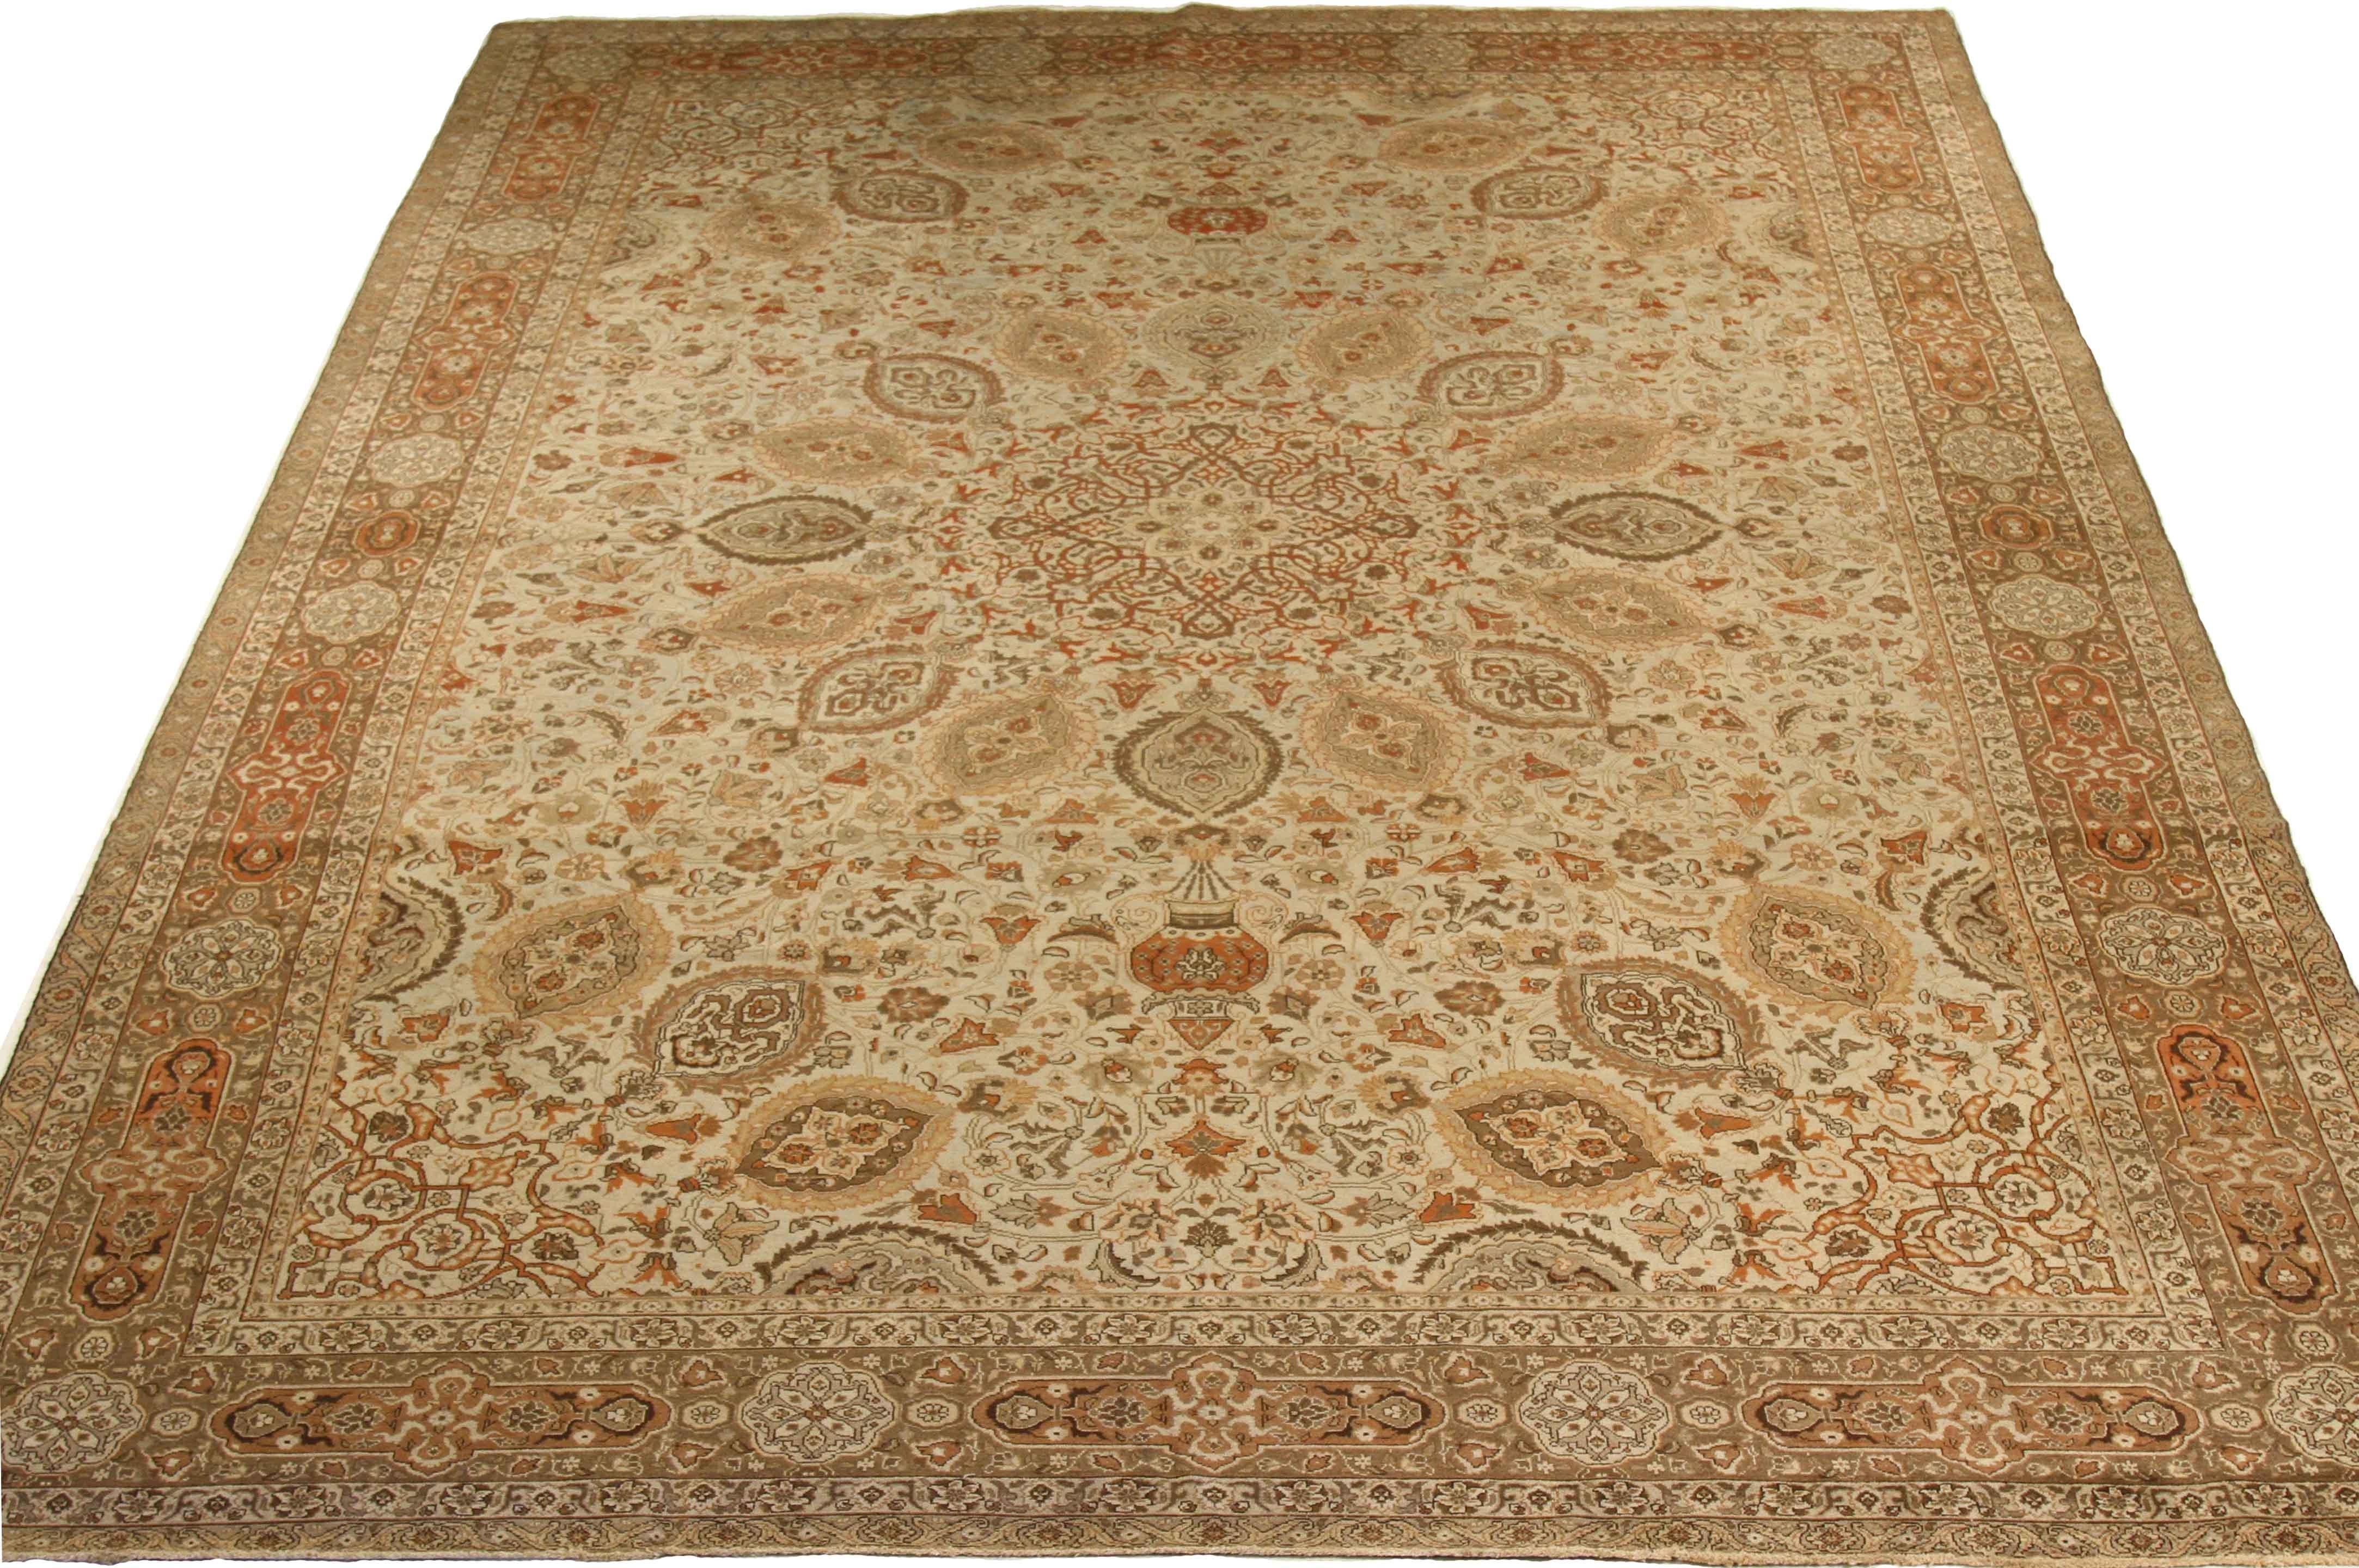 Hand-Knotted  1930s Oversized Antique Persian Tabriz Rug with Ornate Tribal Patterns For Sale